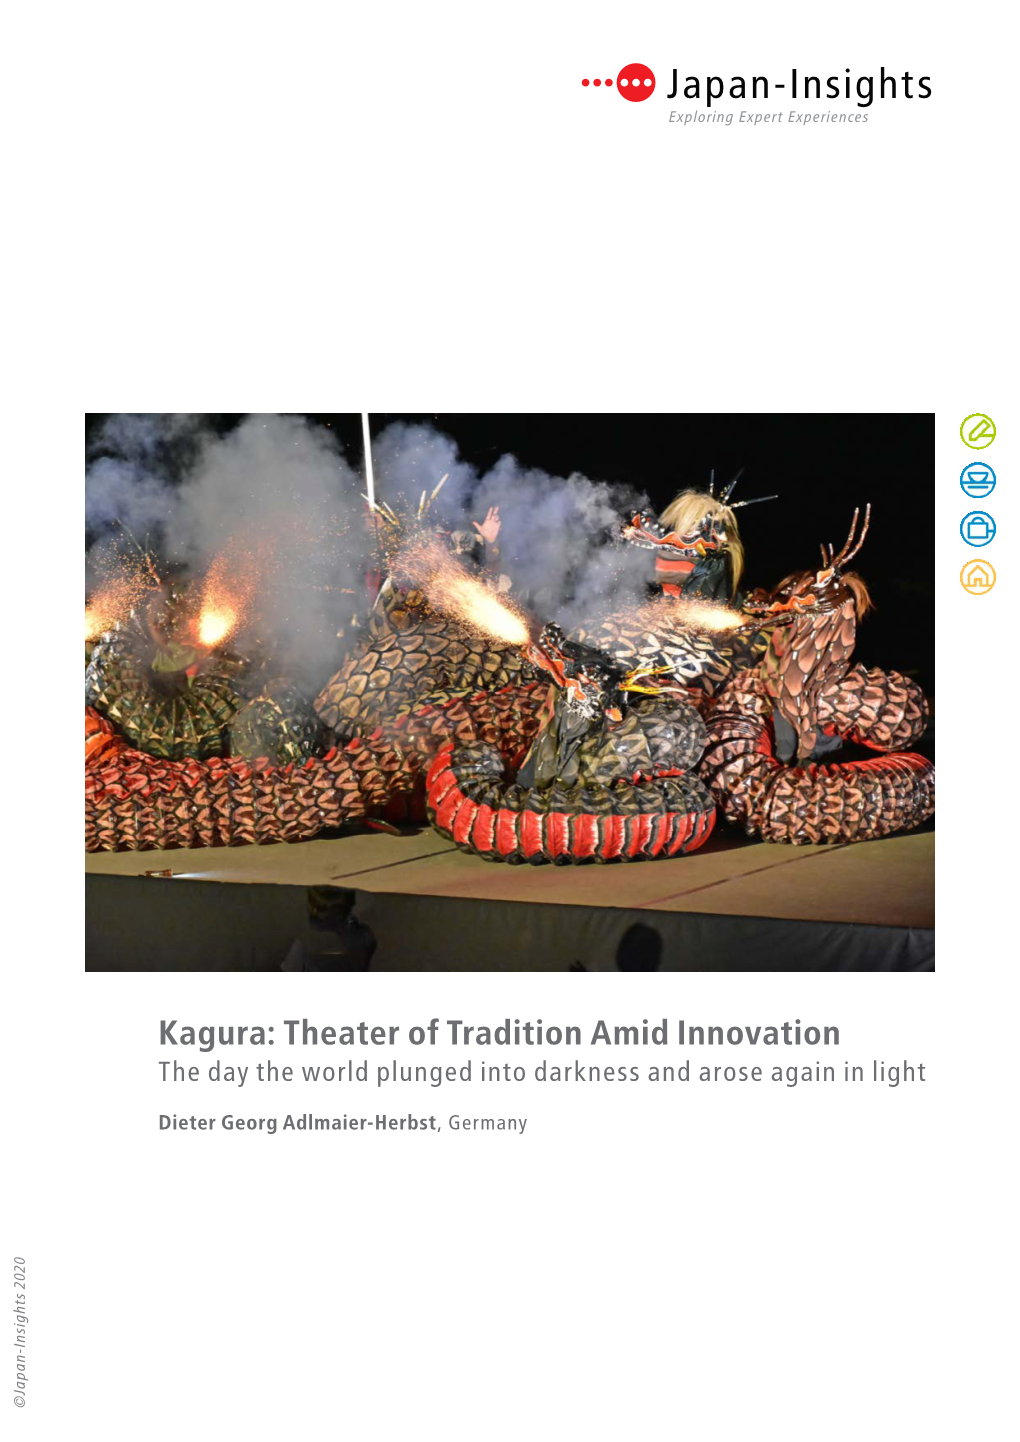 Kagura: Theater of Tradition Amid Innovation the Day the World Plunged Into Darkness and Arose Again in Light